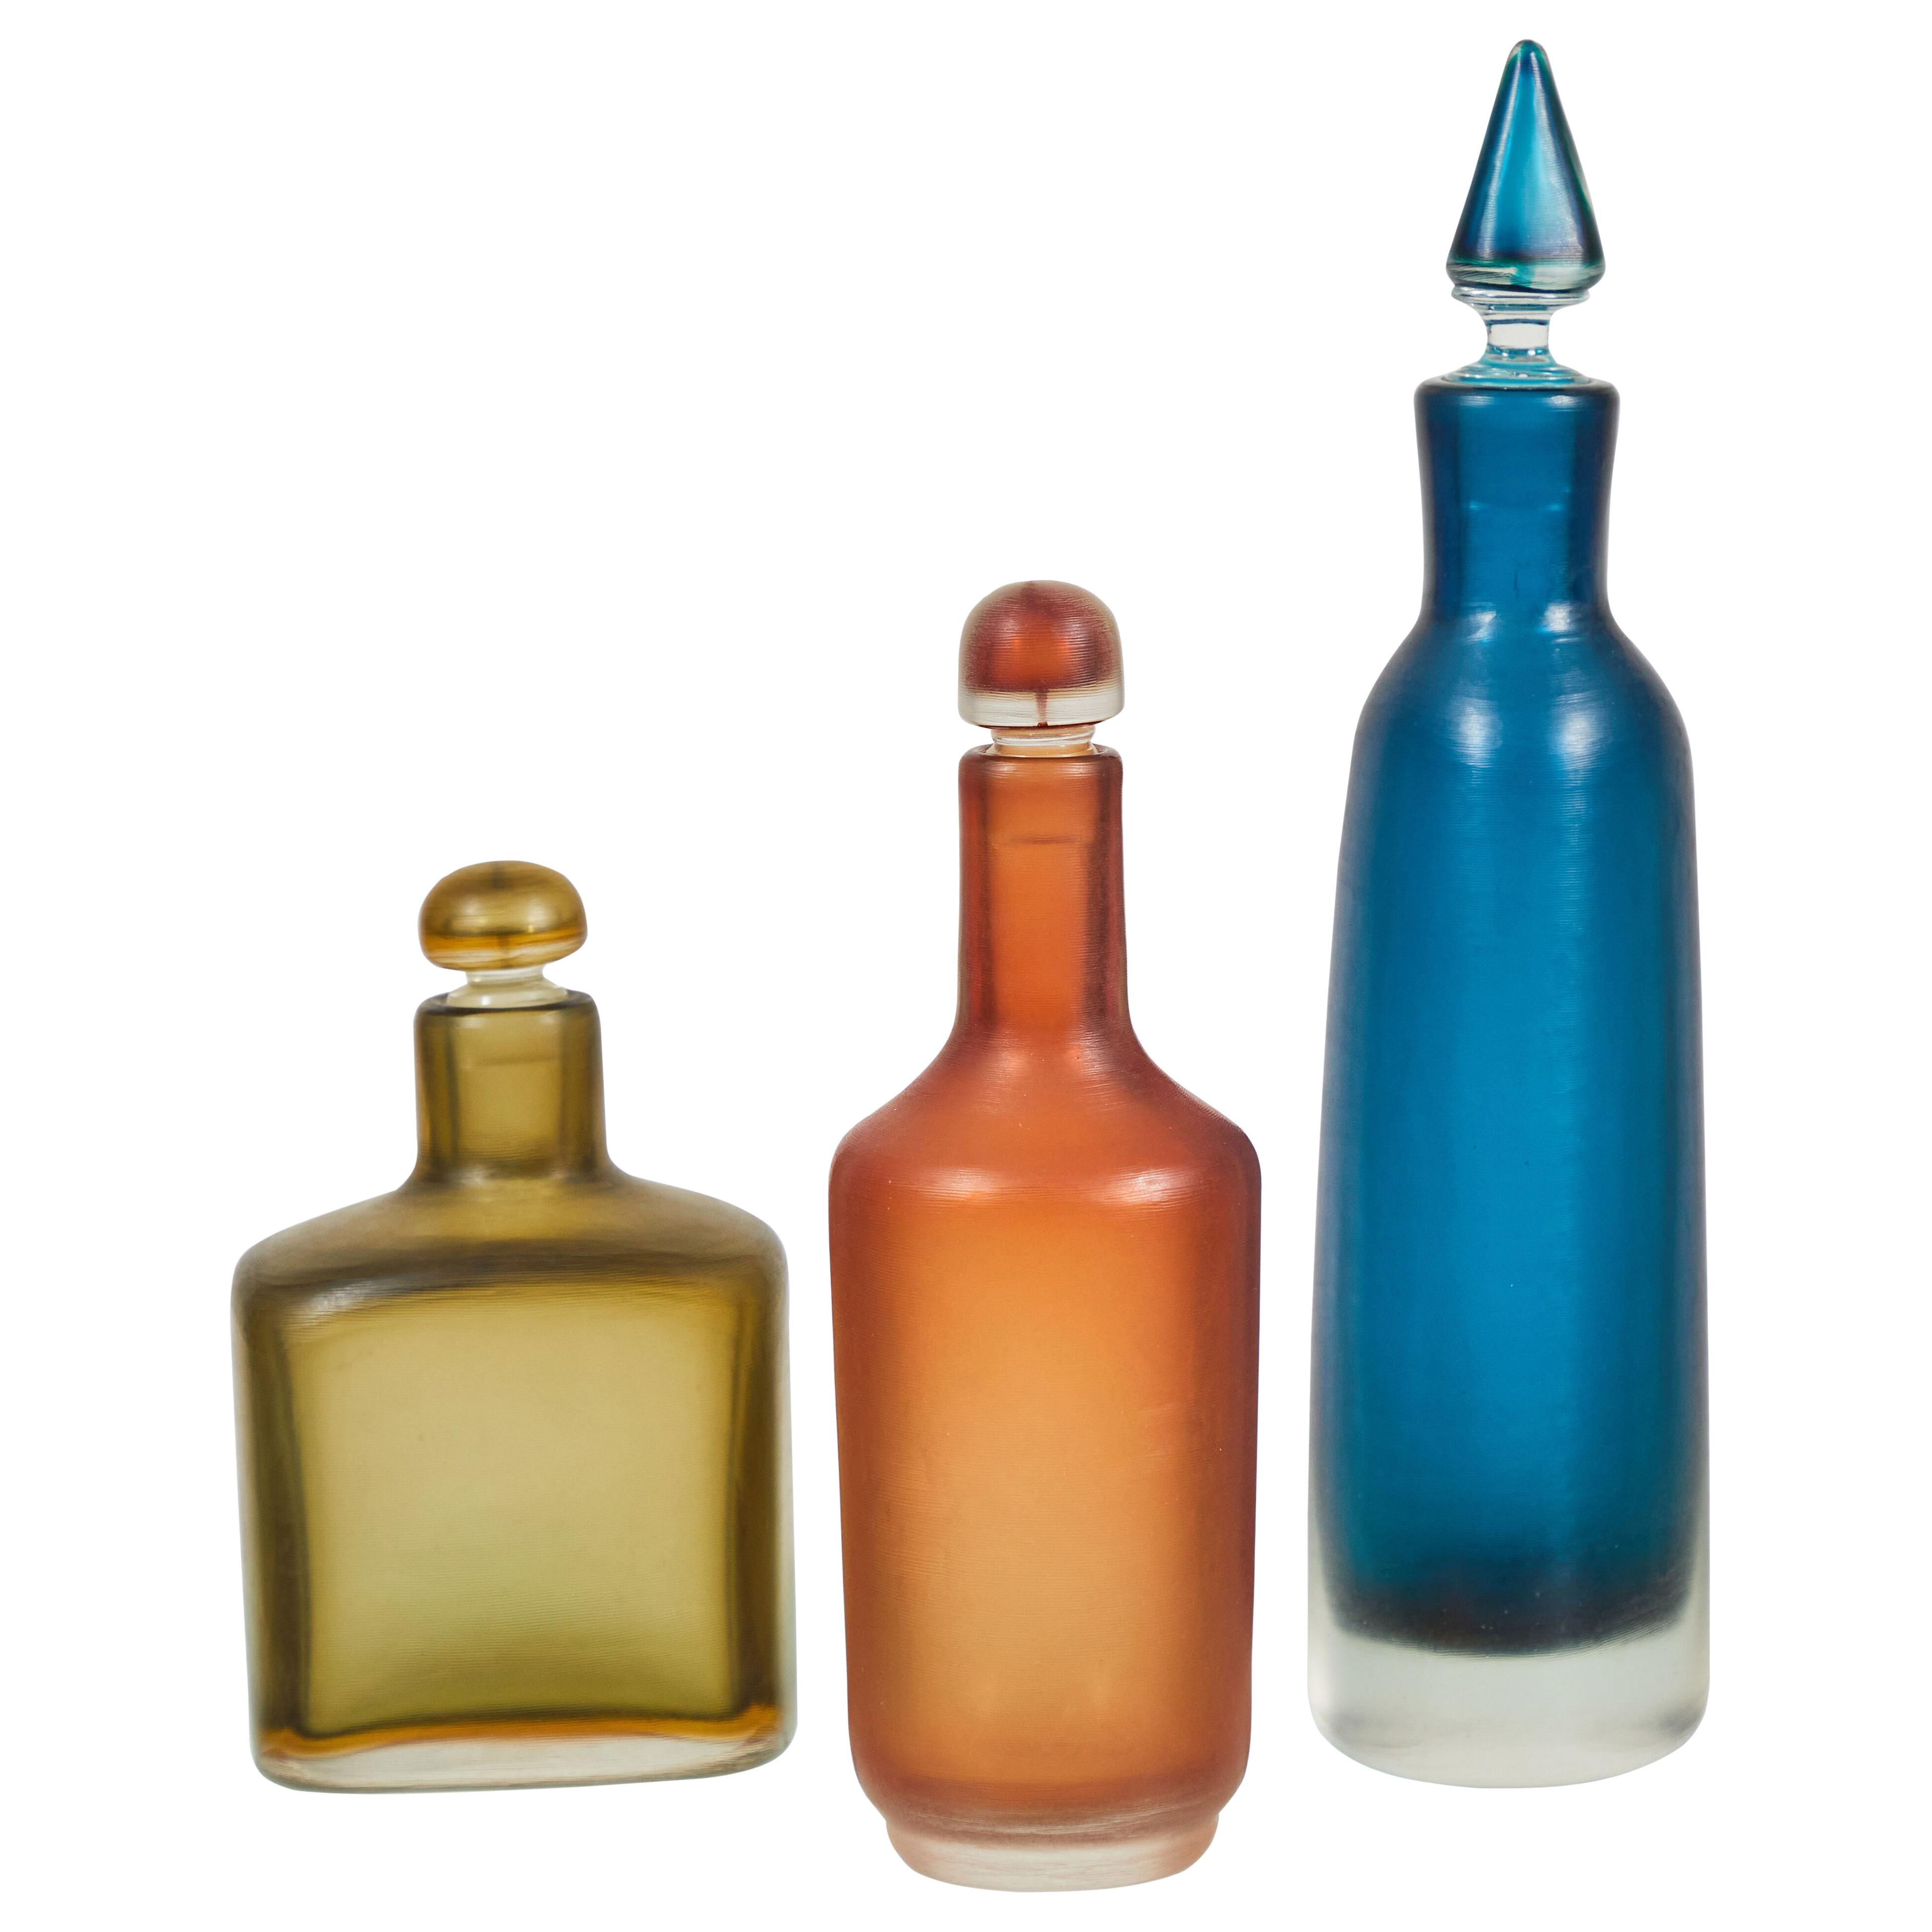 Group of 3 Inciso Technique Decanters by Paolo Venini